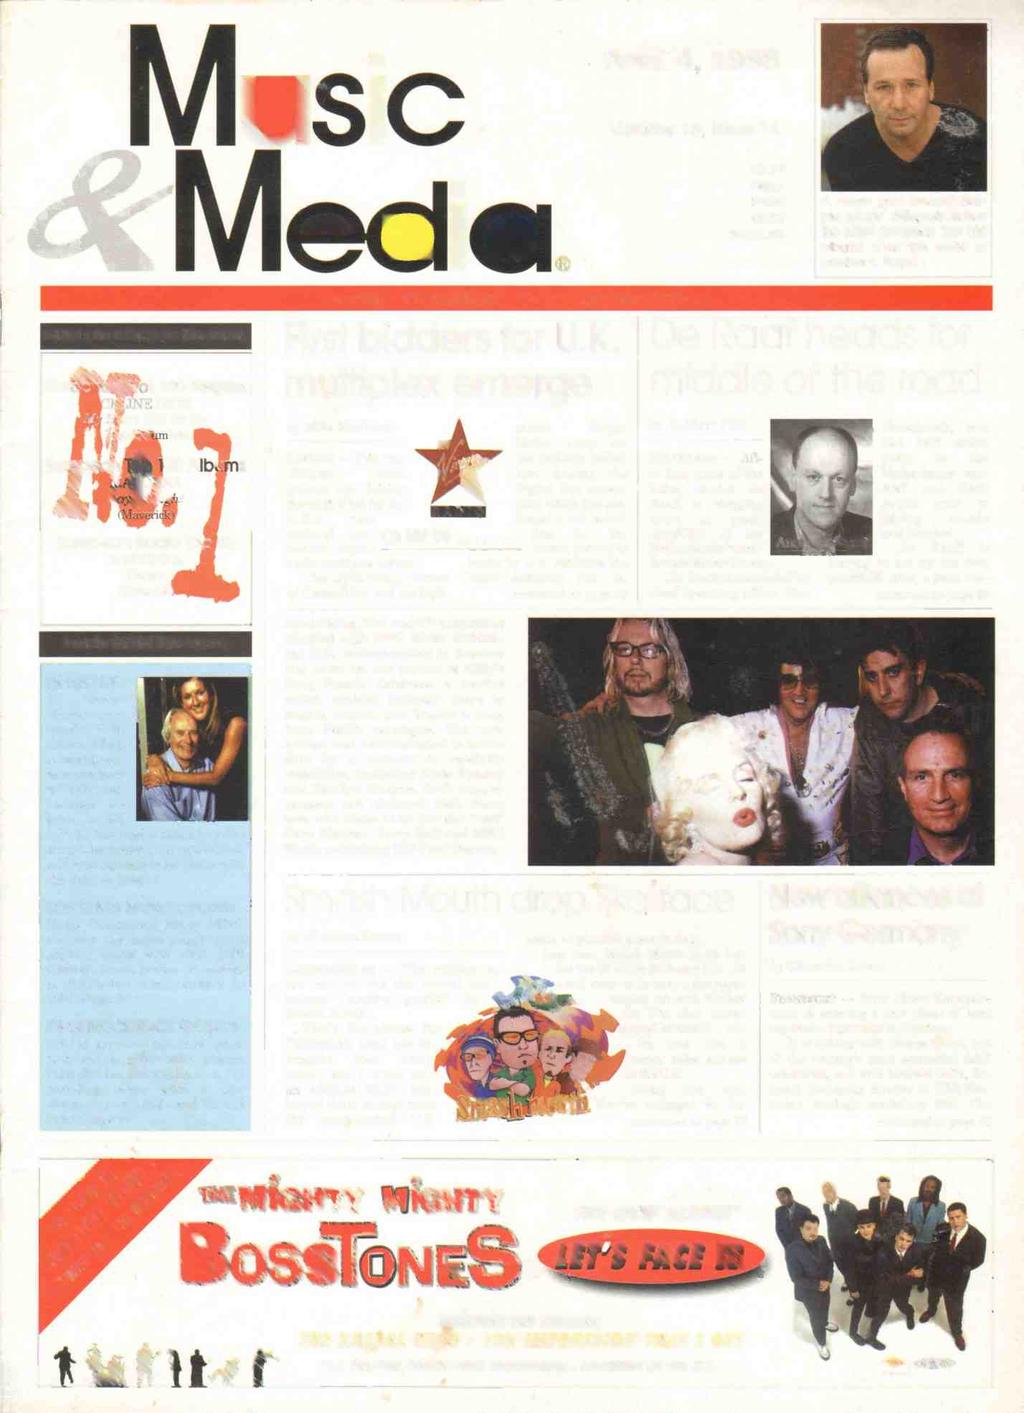 Music APRIL 4, 998 Volume 5, Issue 4 M&M chart toppers this week Eur - of 00 Singles INE DION art Will Go On ic.i '.,' ': -.